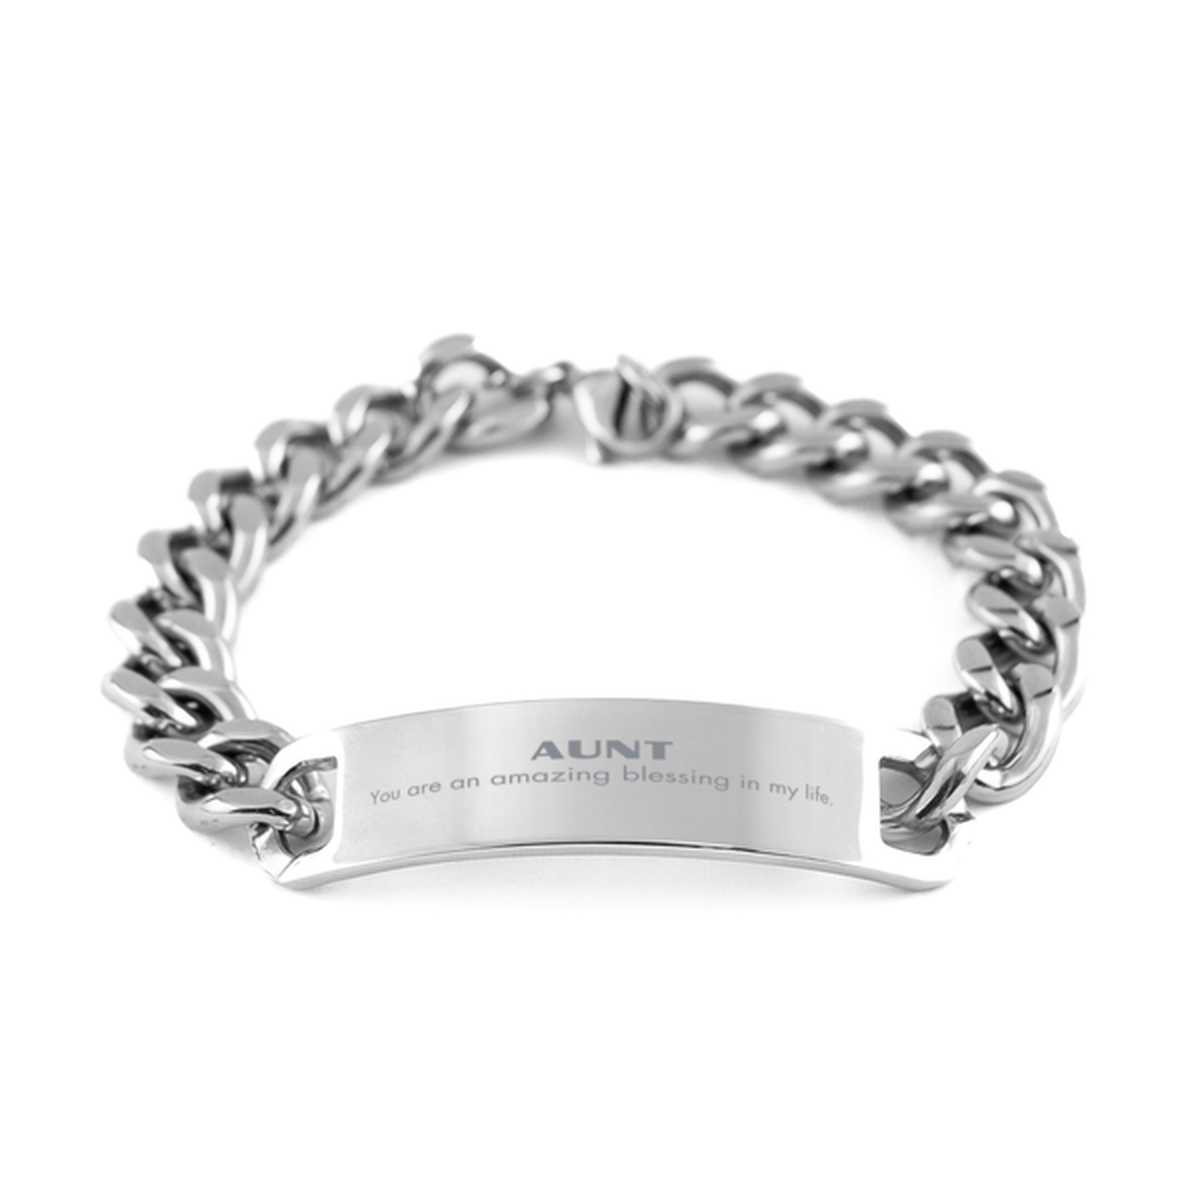 Aunt Cuban Chain Stainless Steel Bracelet, You are an amazing blessing in my life, Thank You Gifts For Aunt, Inspirational Birthday Christmas Unique Gifts For Aunt